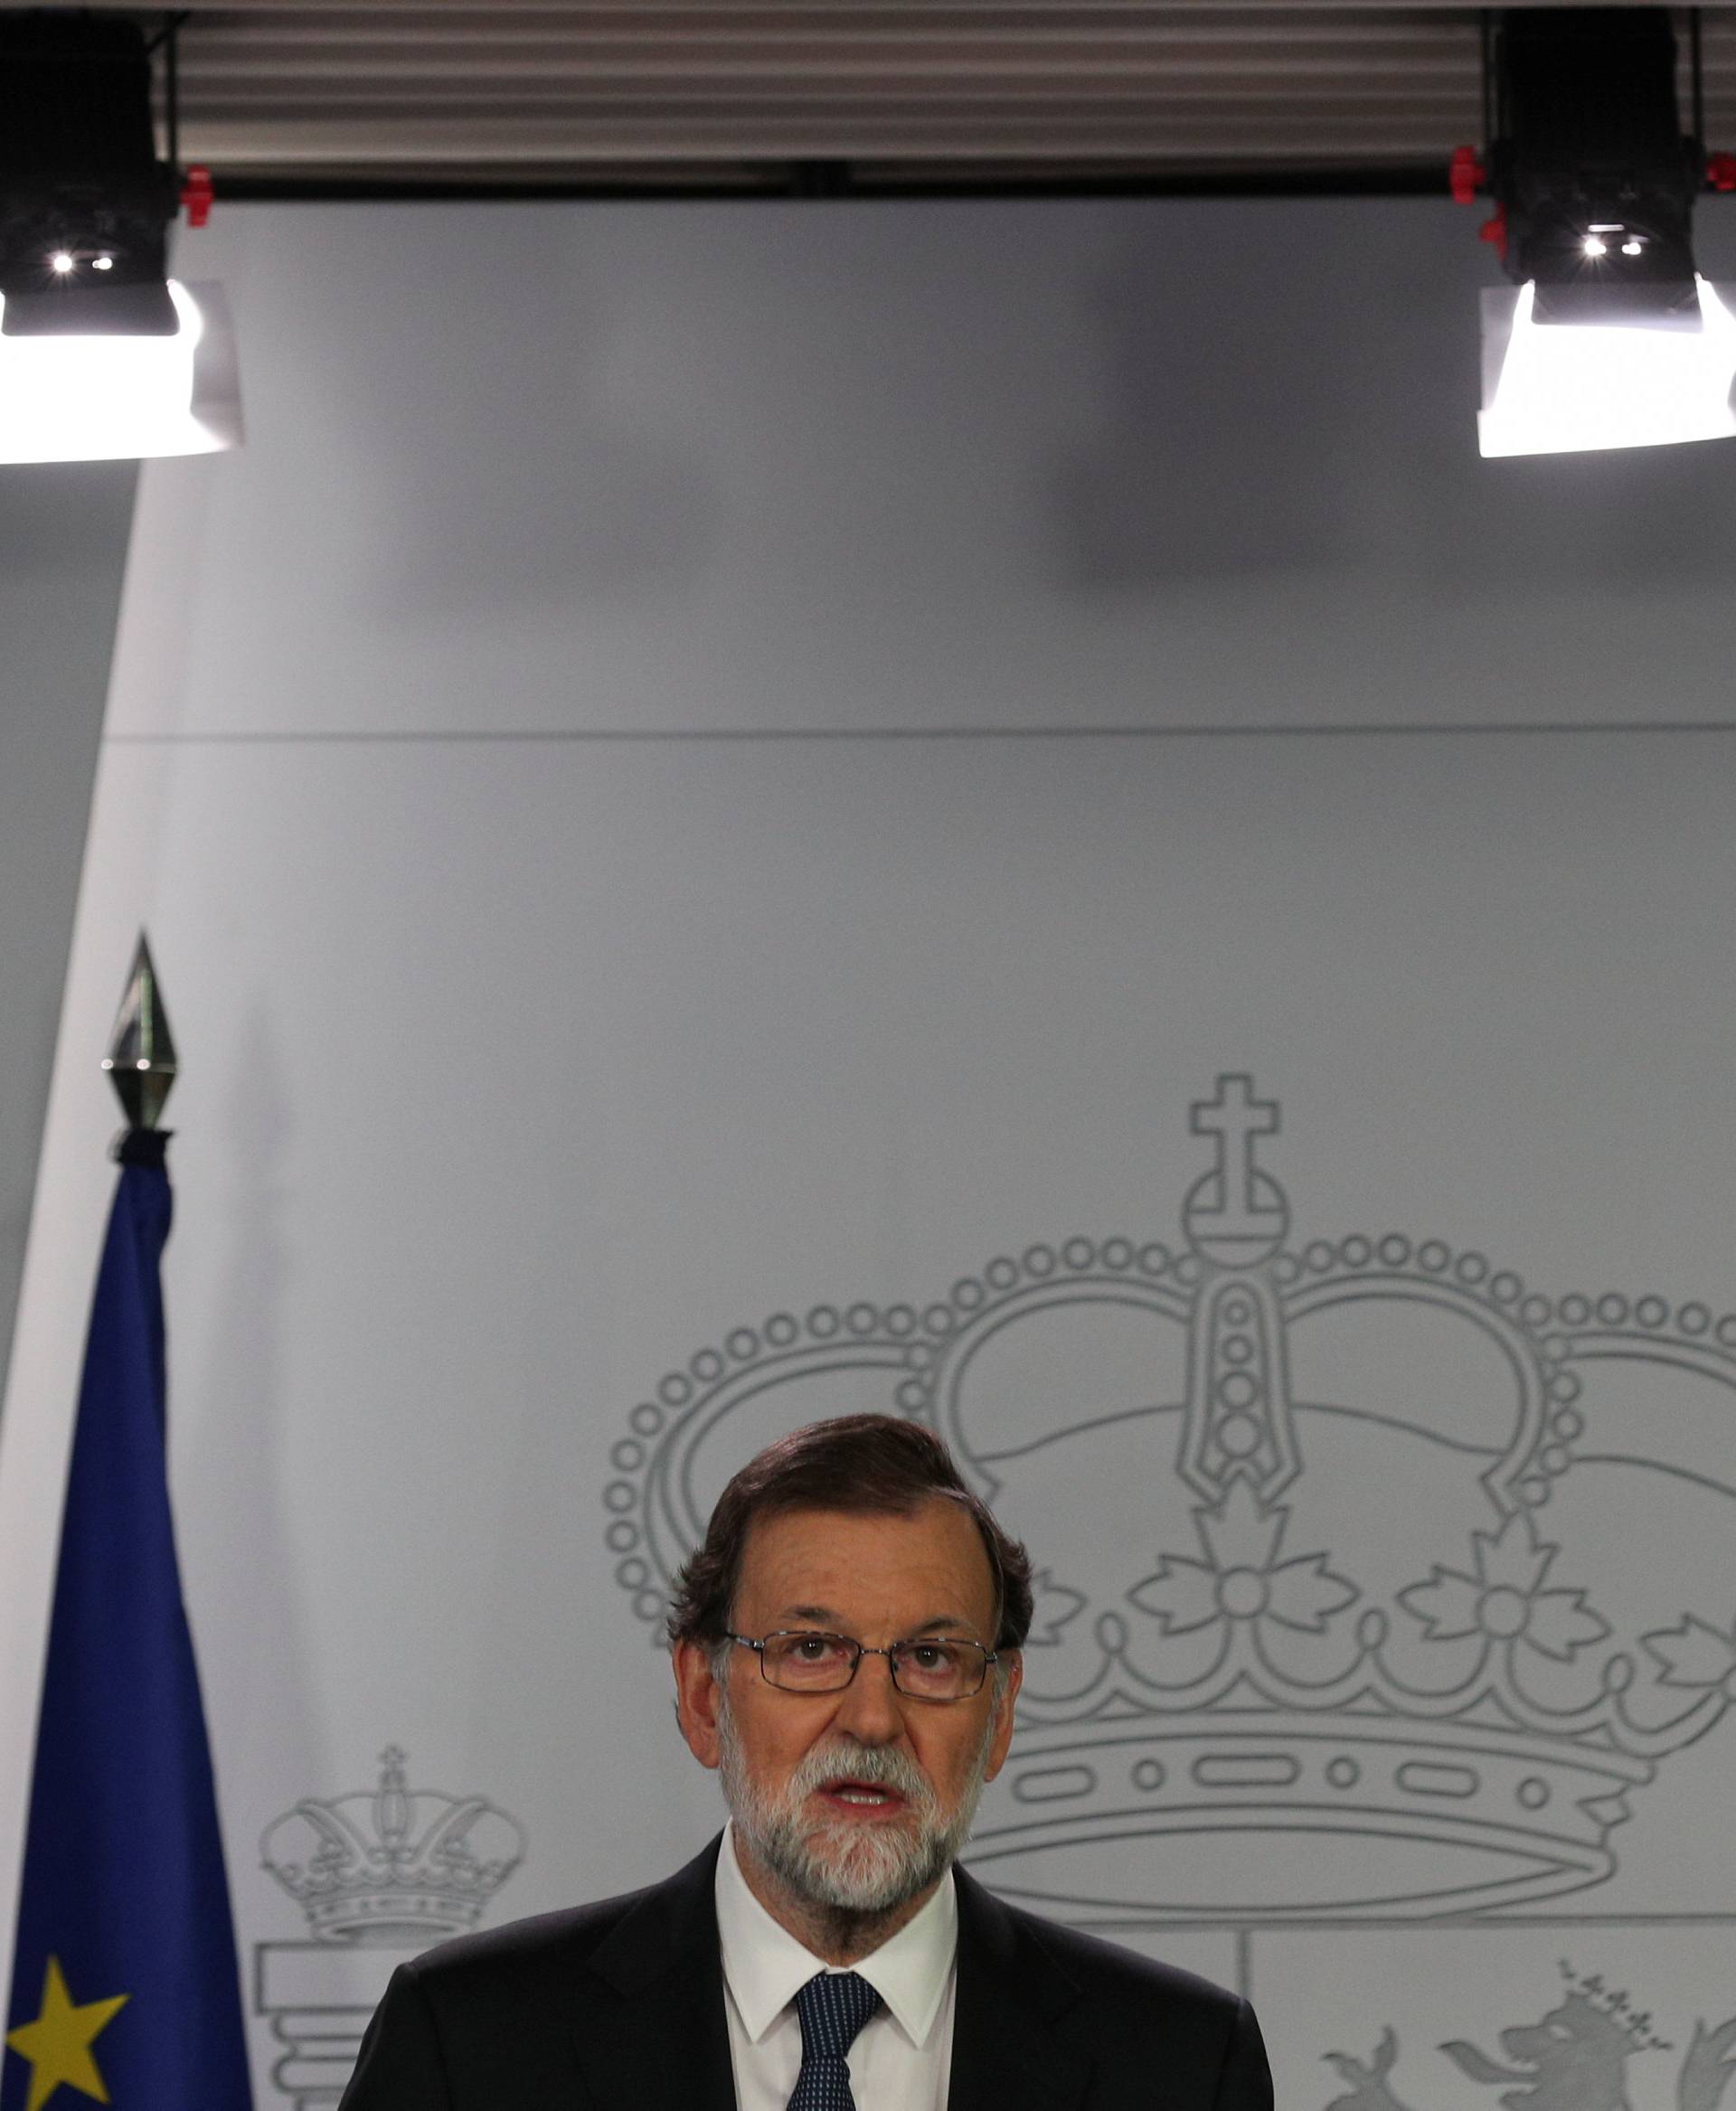 Spain's PM Rajoy delivers a statement at the Moncloa Palace in Madrid